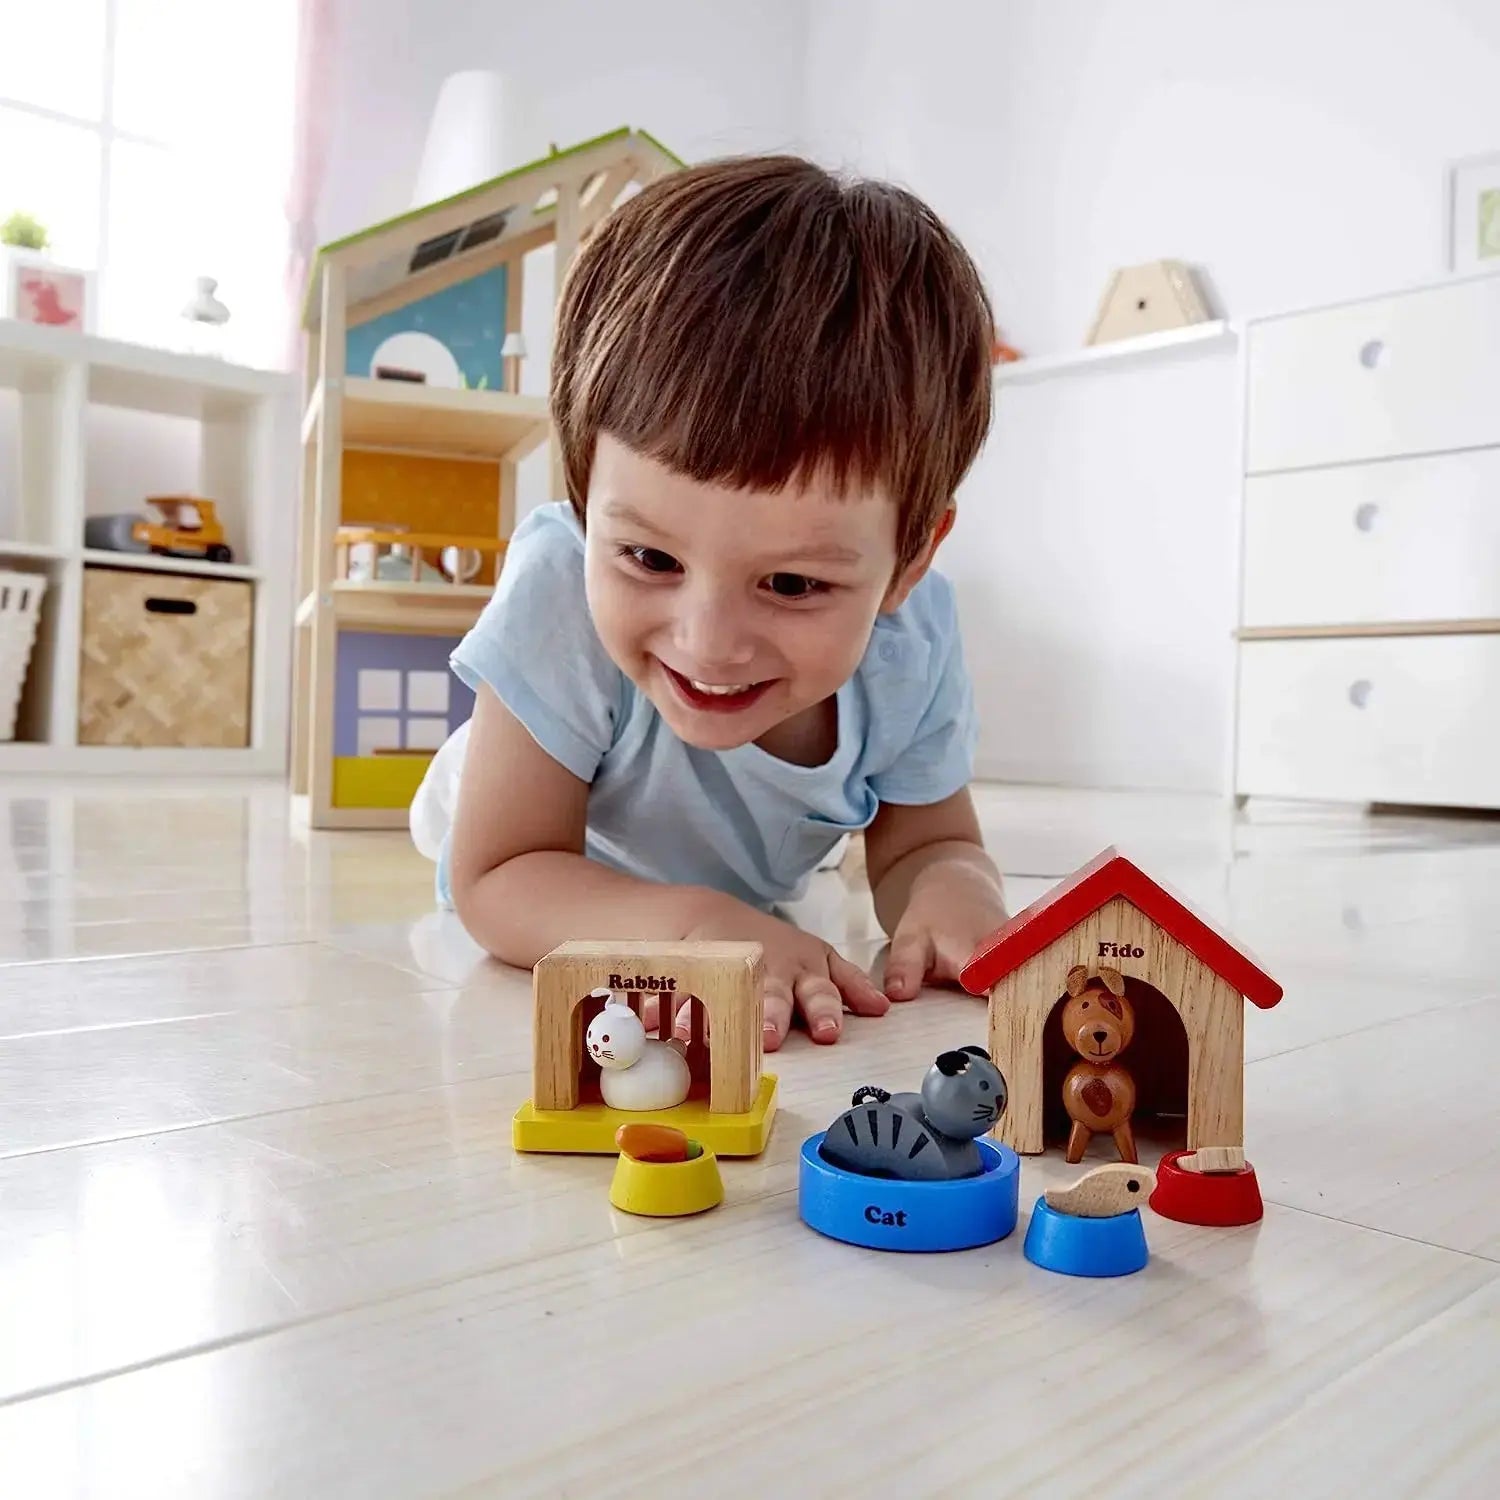 Hape E3405 Kids Wooden Doll Family Mansion with Accessories